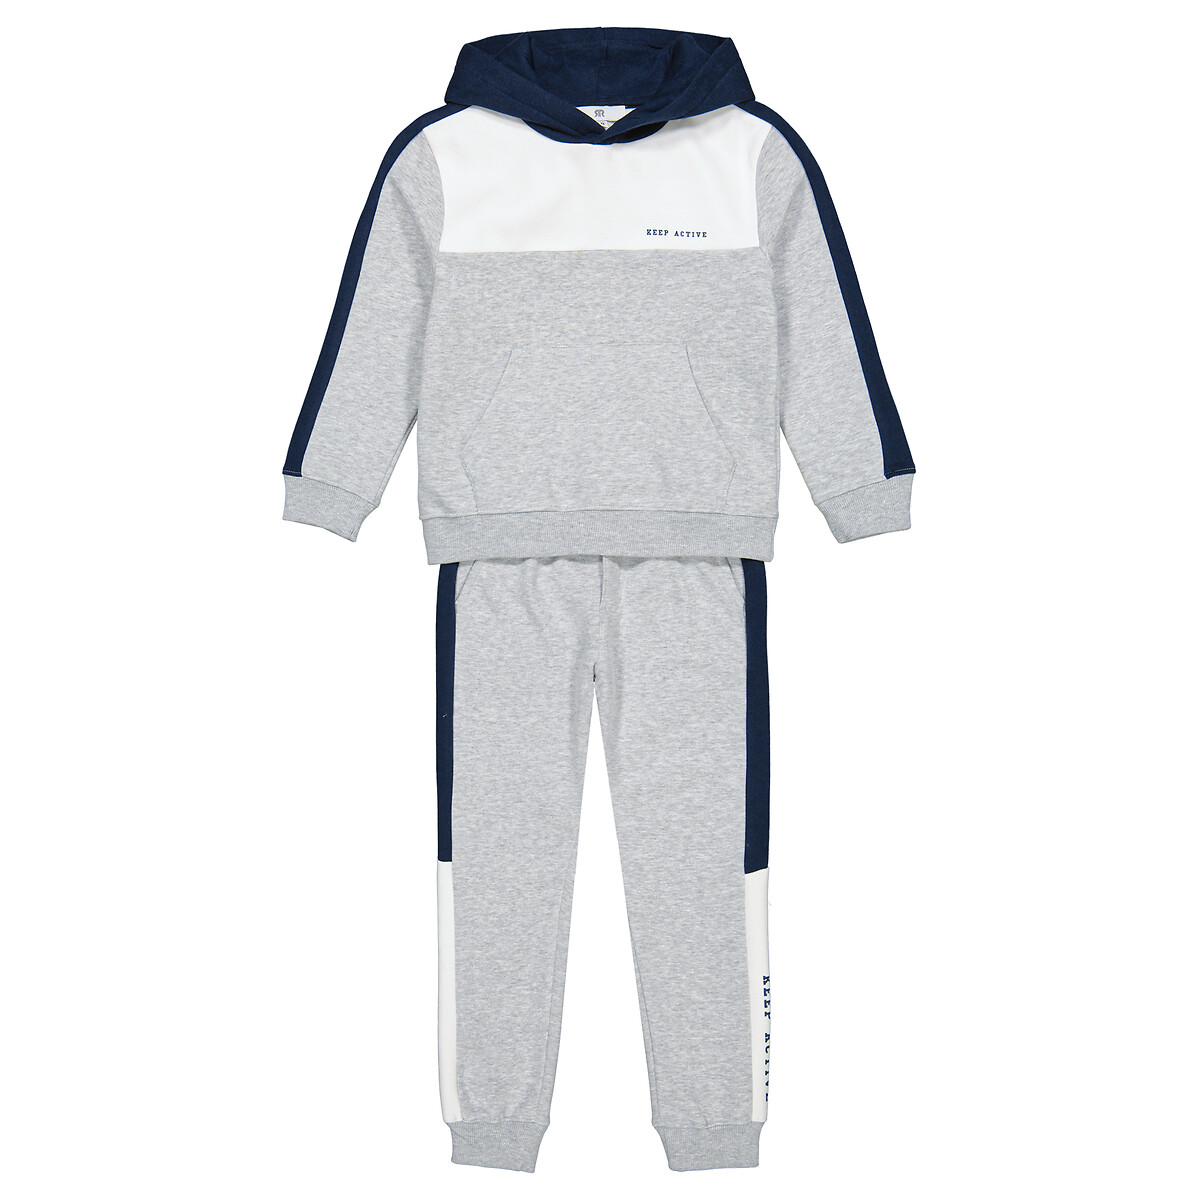 hoodie/joggers outfit in cotton mix